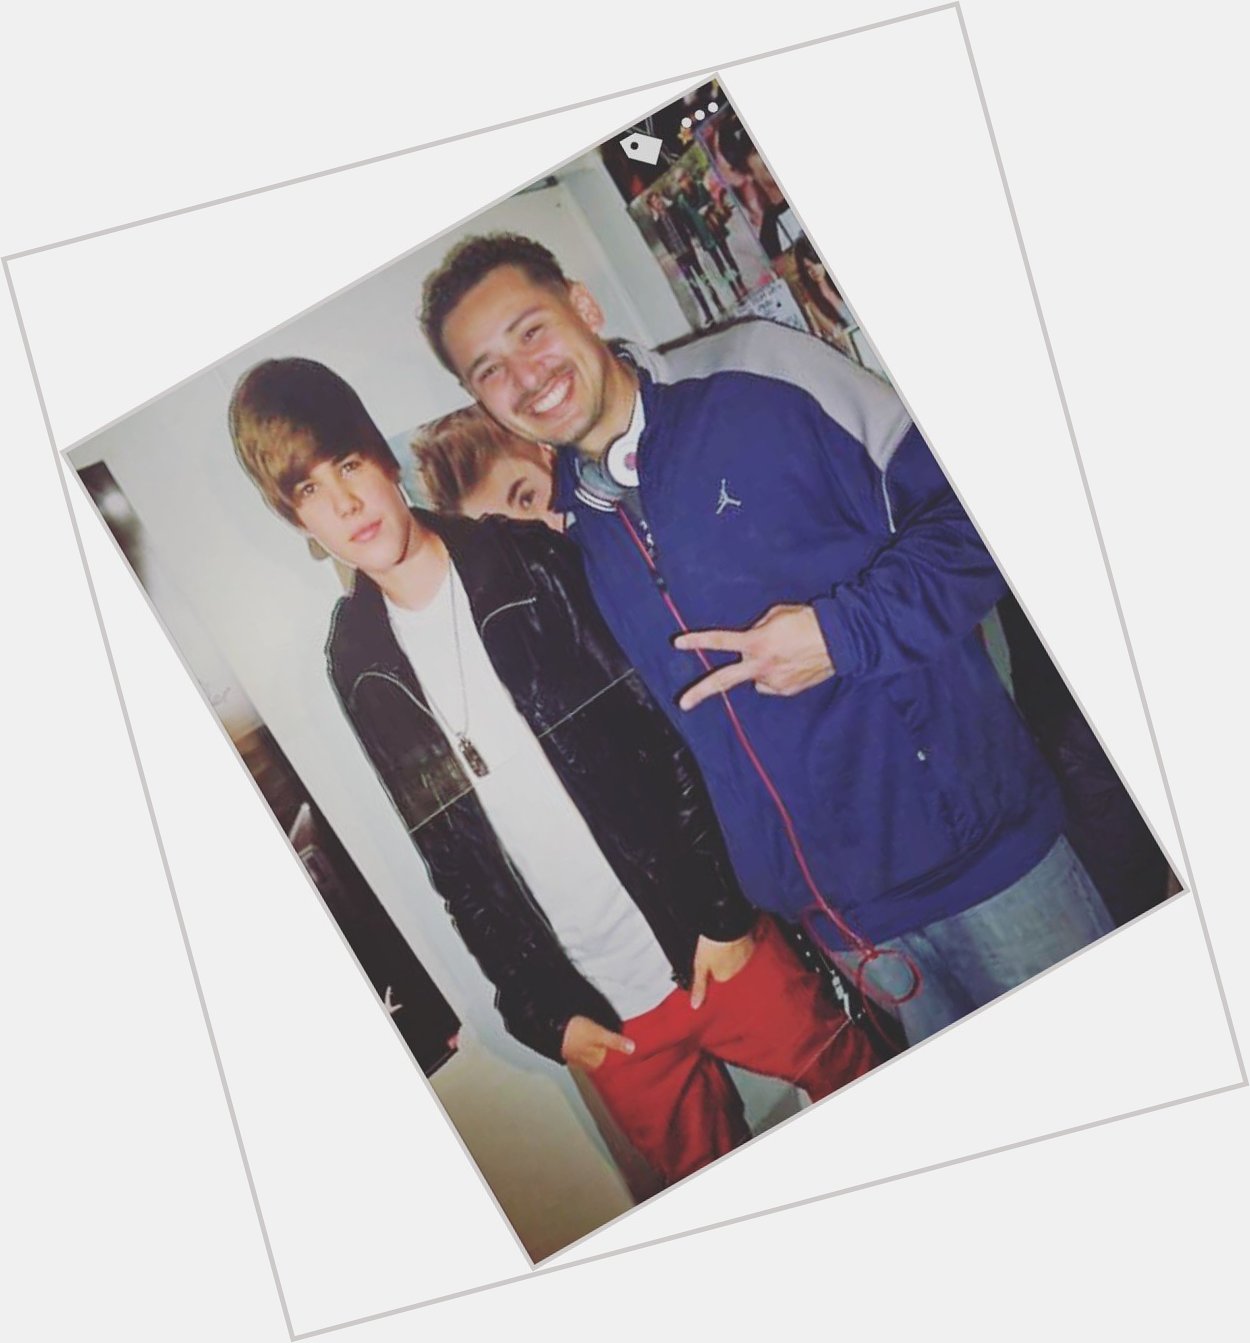 FredoOnTheRadio - Oh nothing much...Just hanging out with Bieb, celebrating big...Happy Birthday Justin Bieber! 